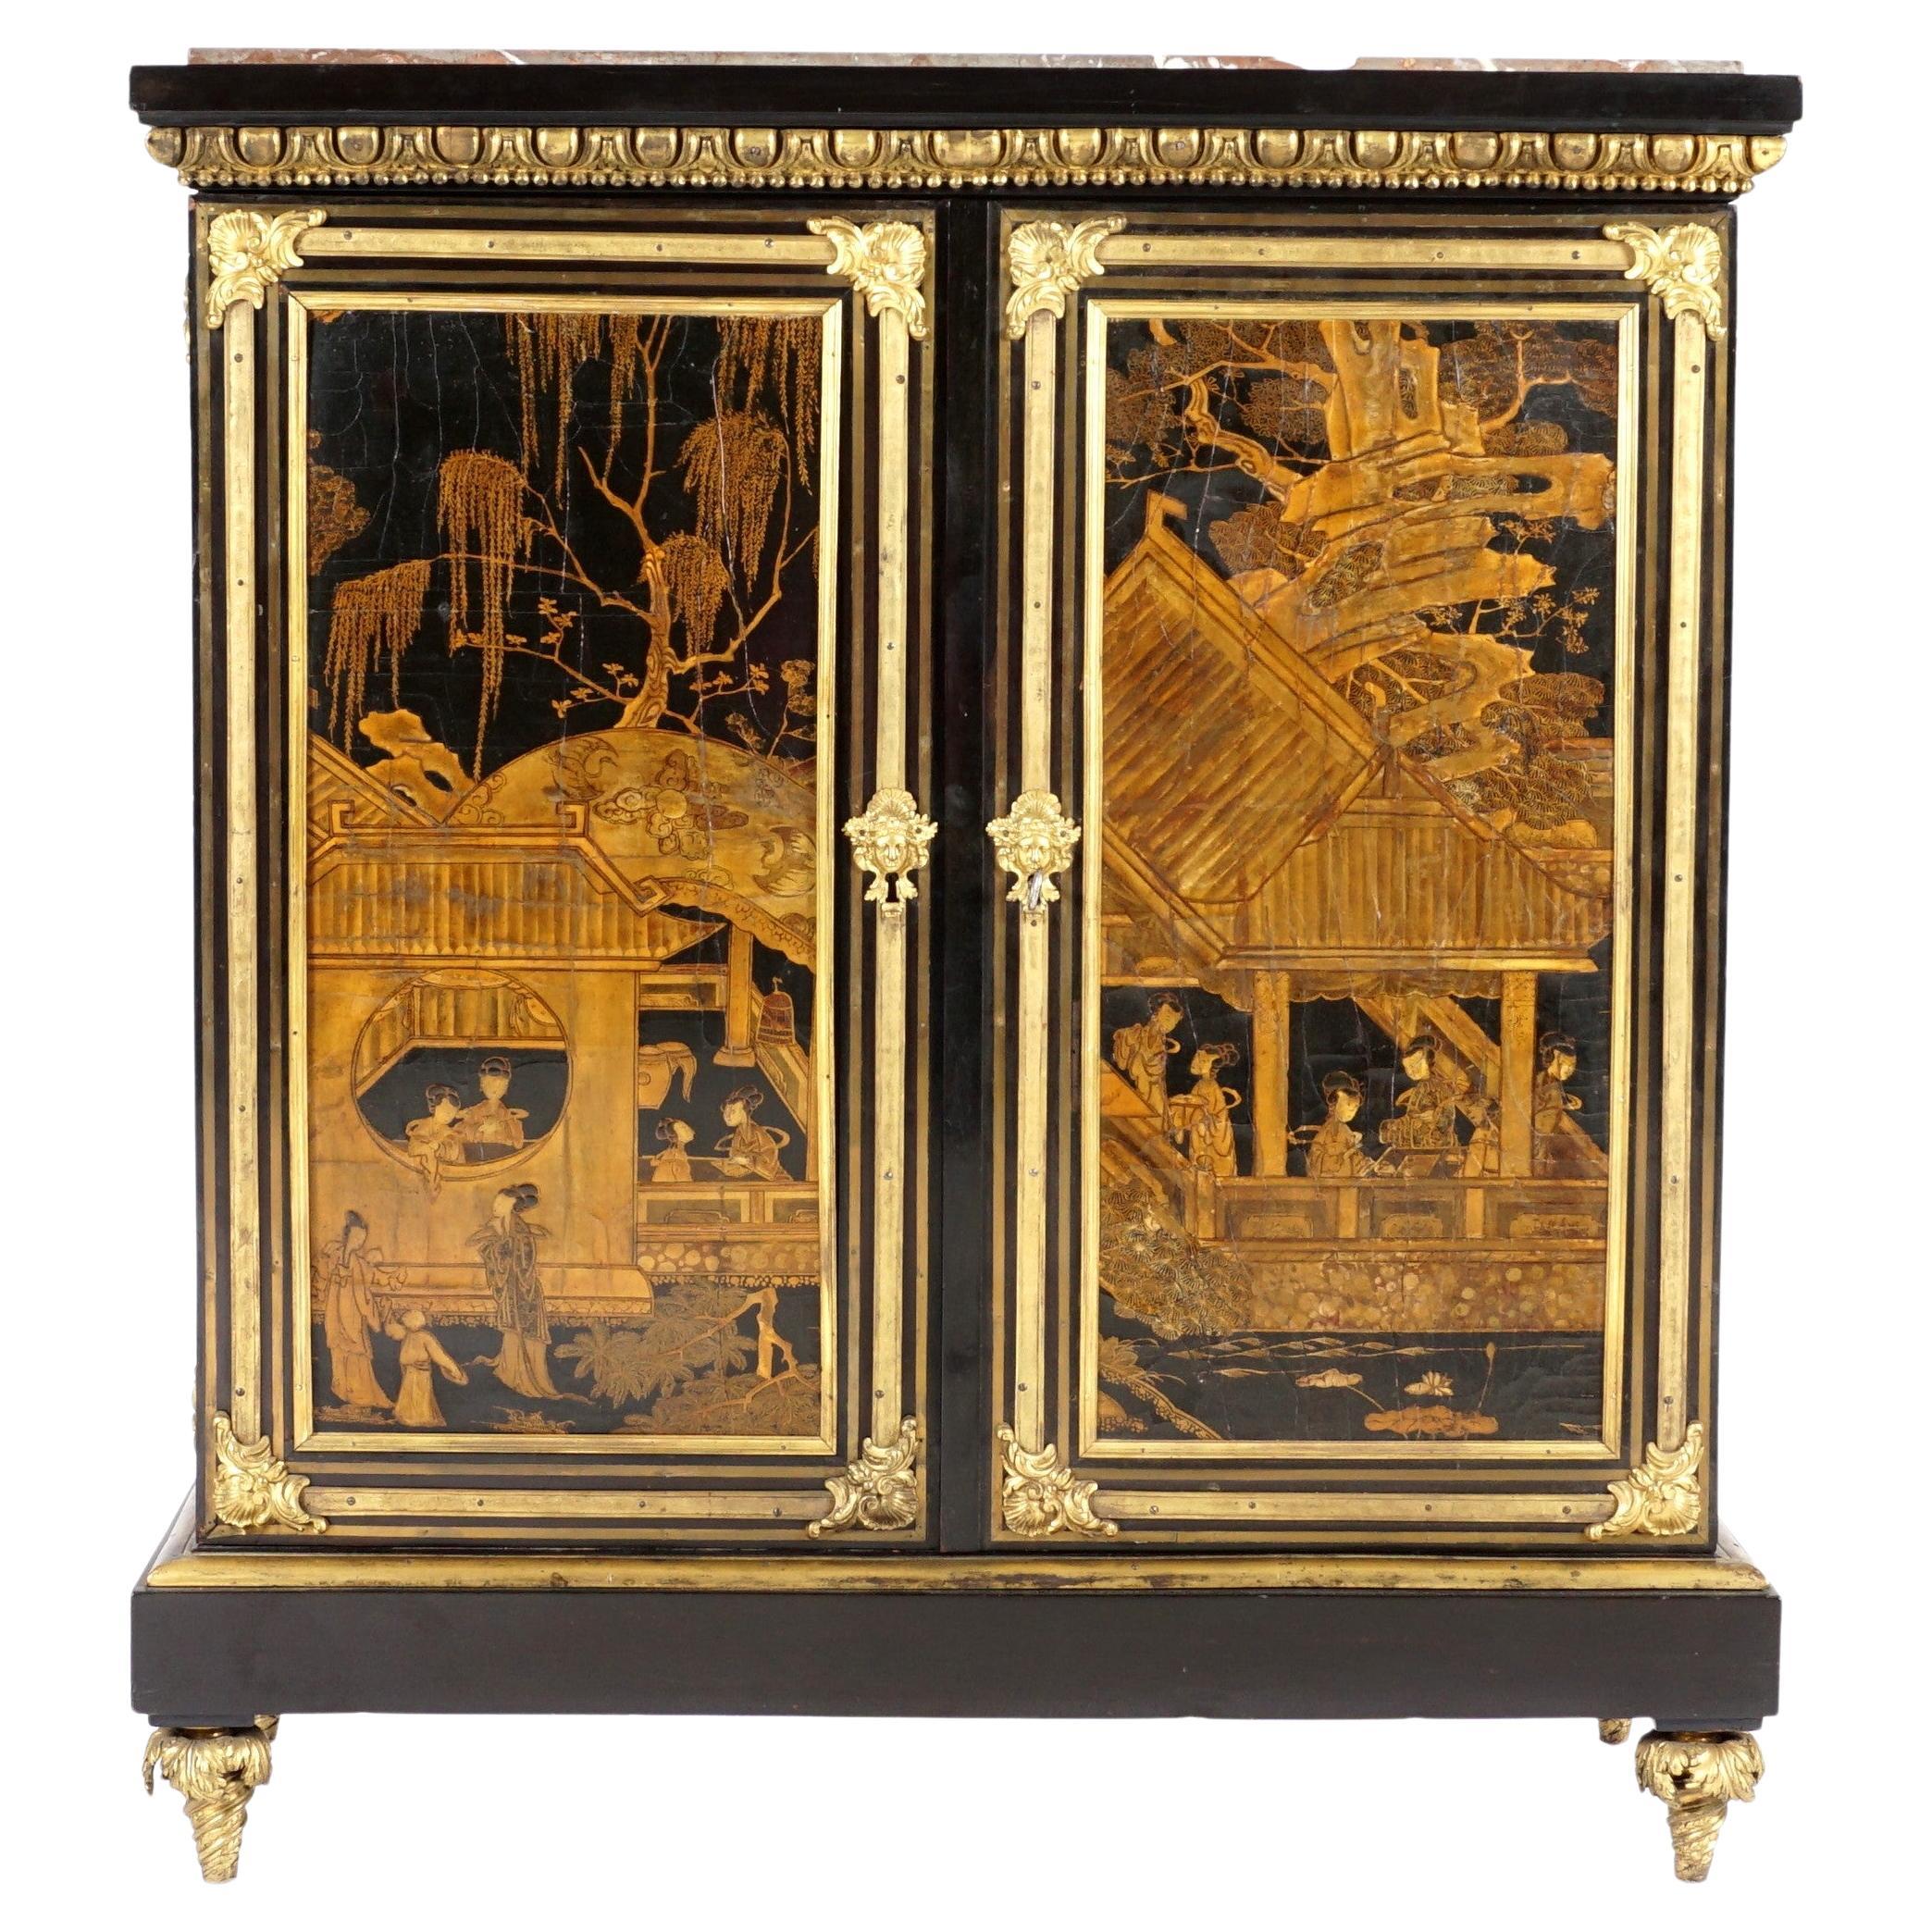 A French Ormolu mounted and brass inlaid ebonized and chinese lacquer cabinet or MEUBLE D'APPUI. Inset marble top over black lacquered case, ormolu gadroon border and decoration. A pair of cabinet doors opening to a shelved interior with two